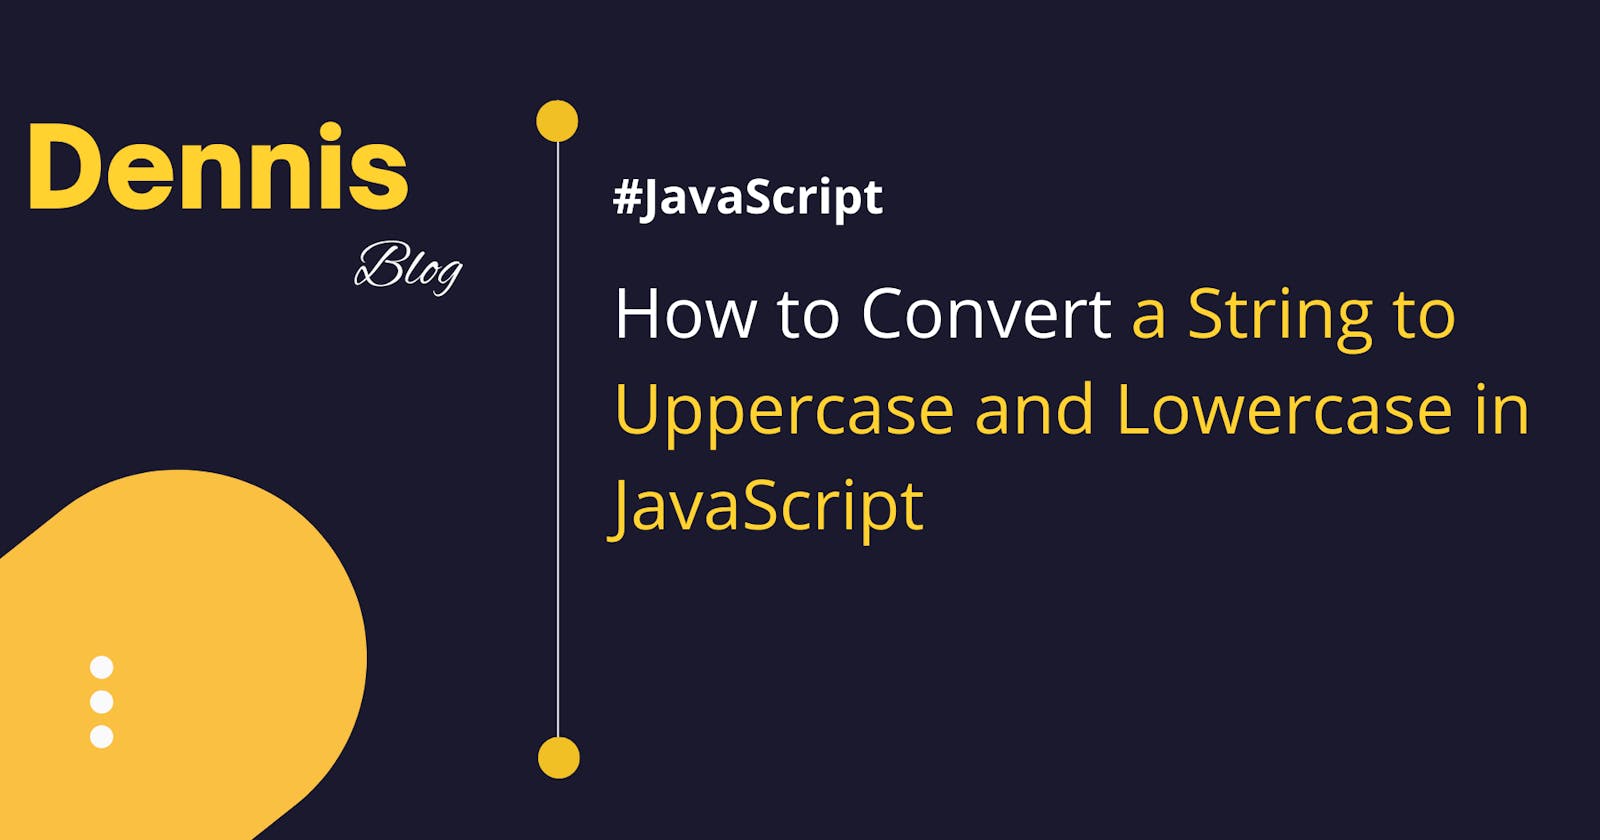 How to Convert a String to Uppercase and Lowercase in JavaScript